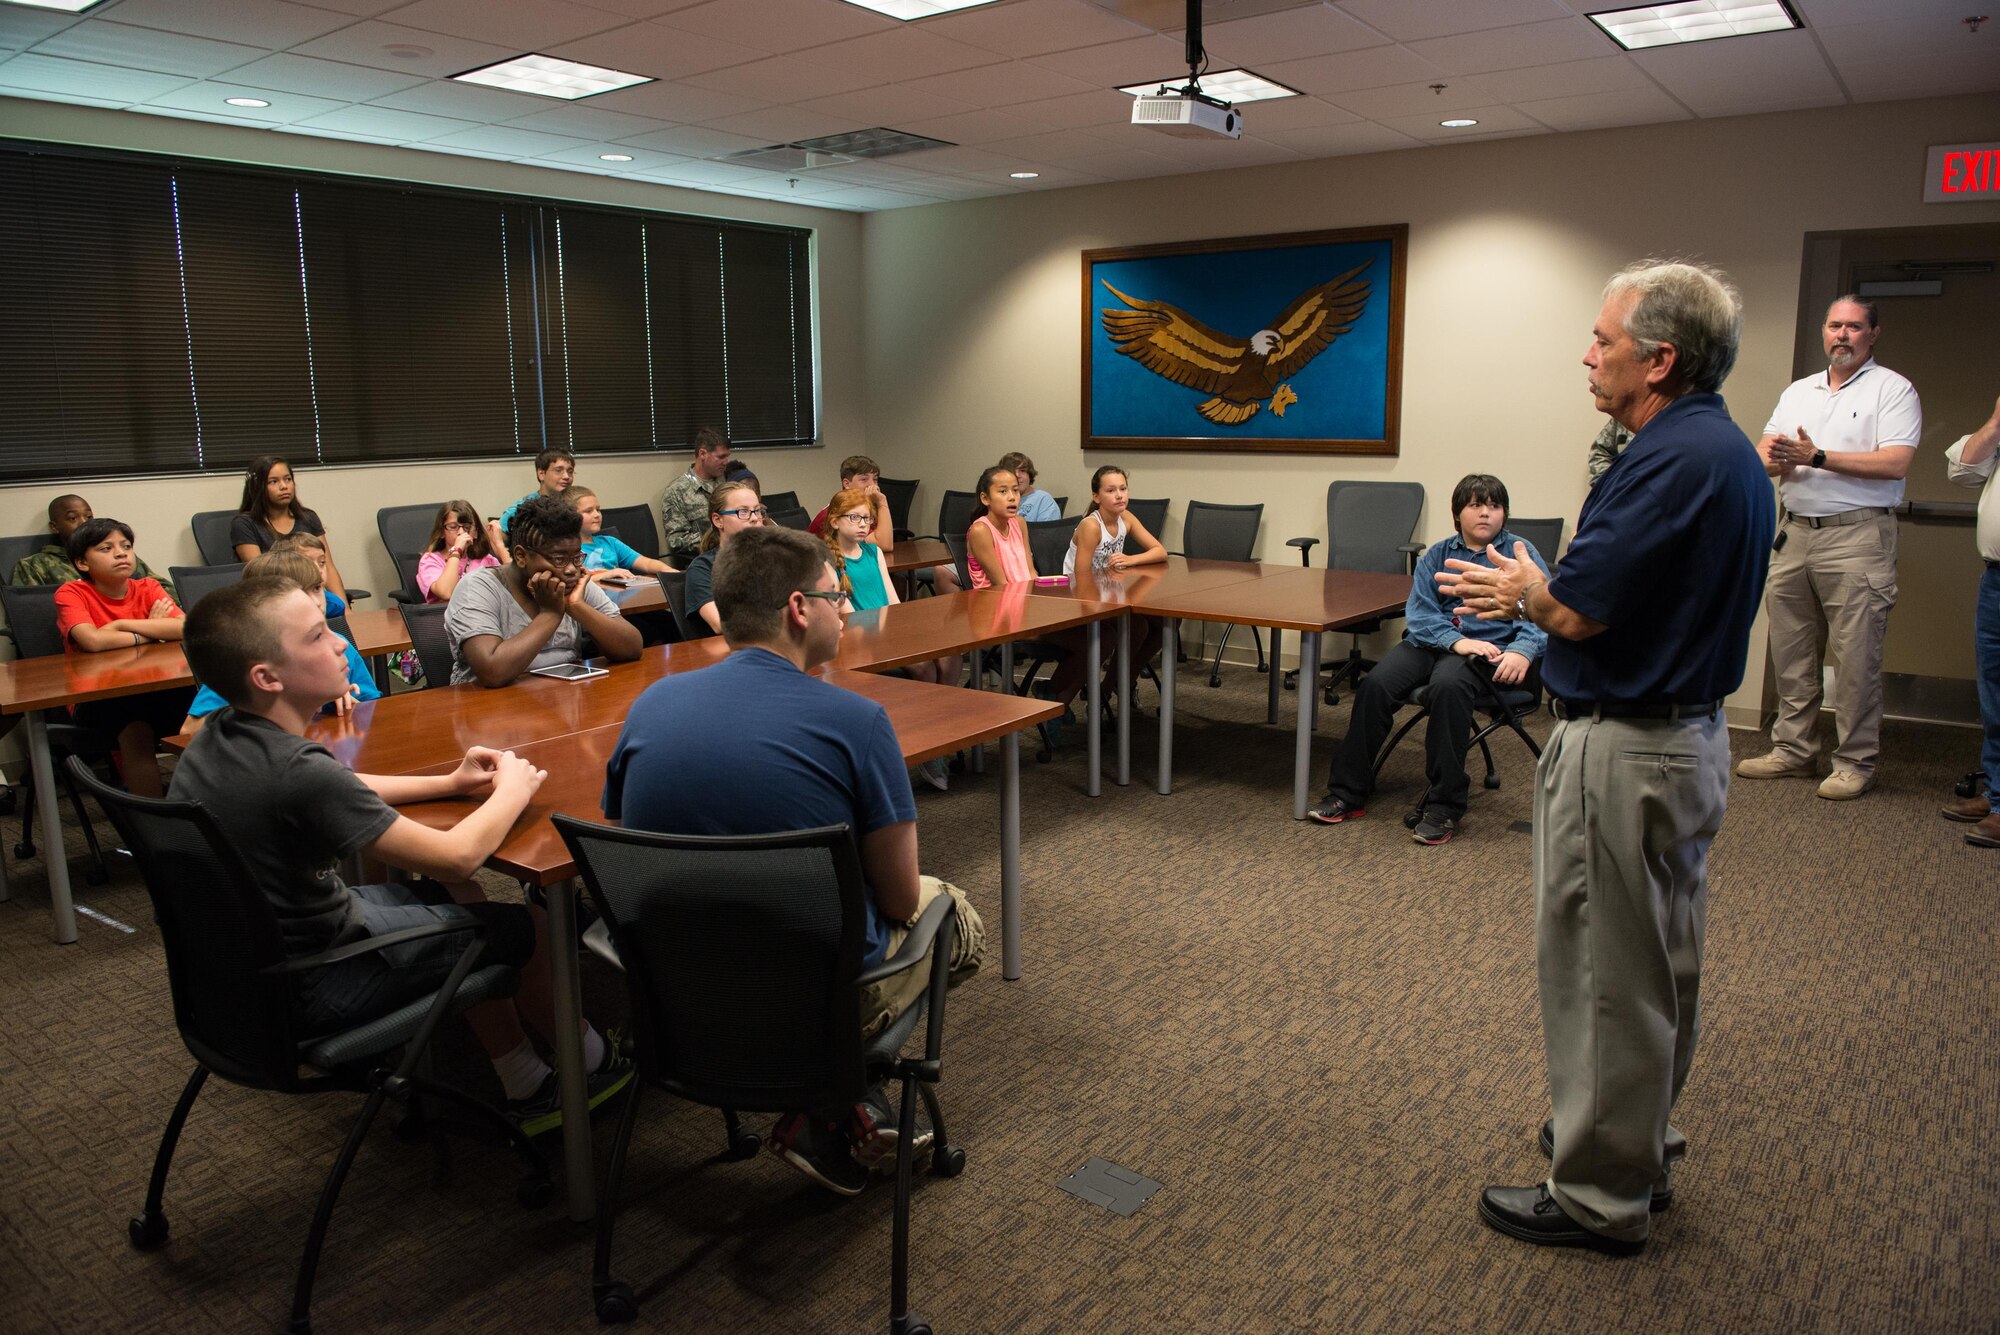 David Carley, 81st Training Support Squadron instructional technology unit chief, explains safety procedures and policies before students from the Science, Technology, Engineering, and Mathematics Camp begin a tour of the Trainer Development Center June 23, 2016, on Keesler Air Force Base, Miss. Keesler partnered with the Biloxi School District, Biloxi, Miss. in a week-long summer program designed to educate and enrich middle school students interested in science, technology, engineering or mathematics. (U.S. Air Force photo by Marie Floyd/Released)